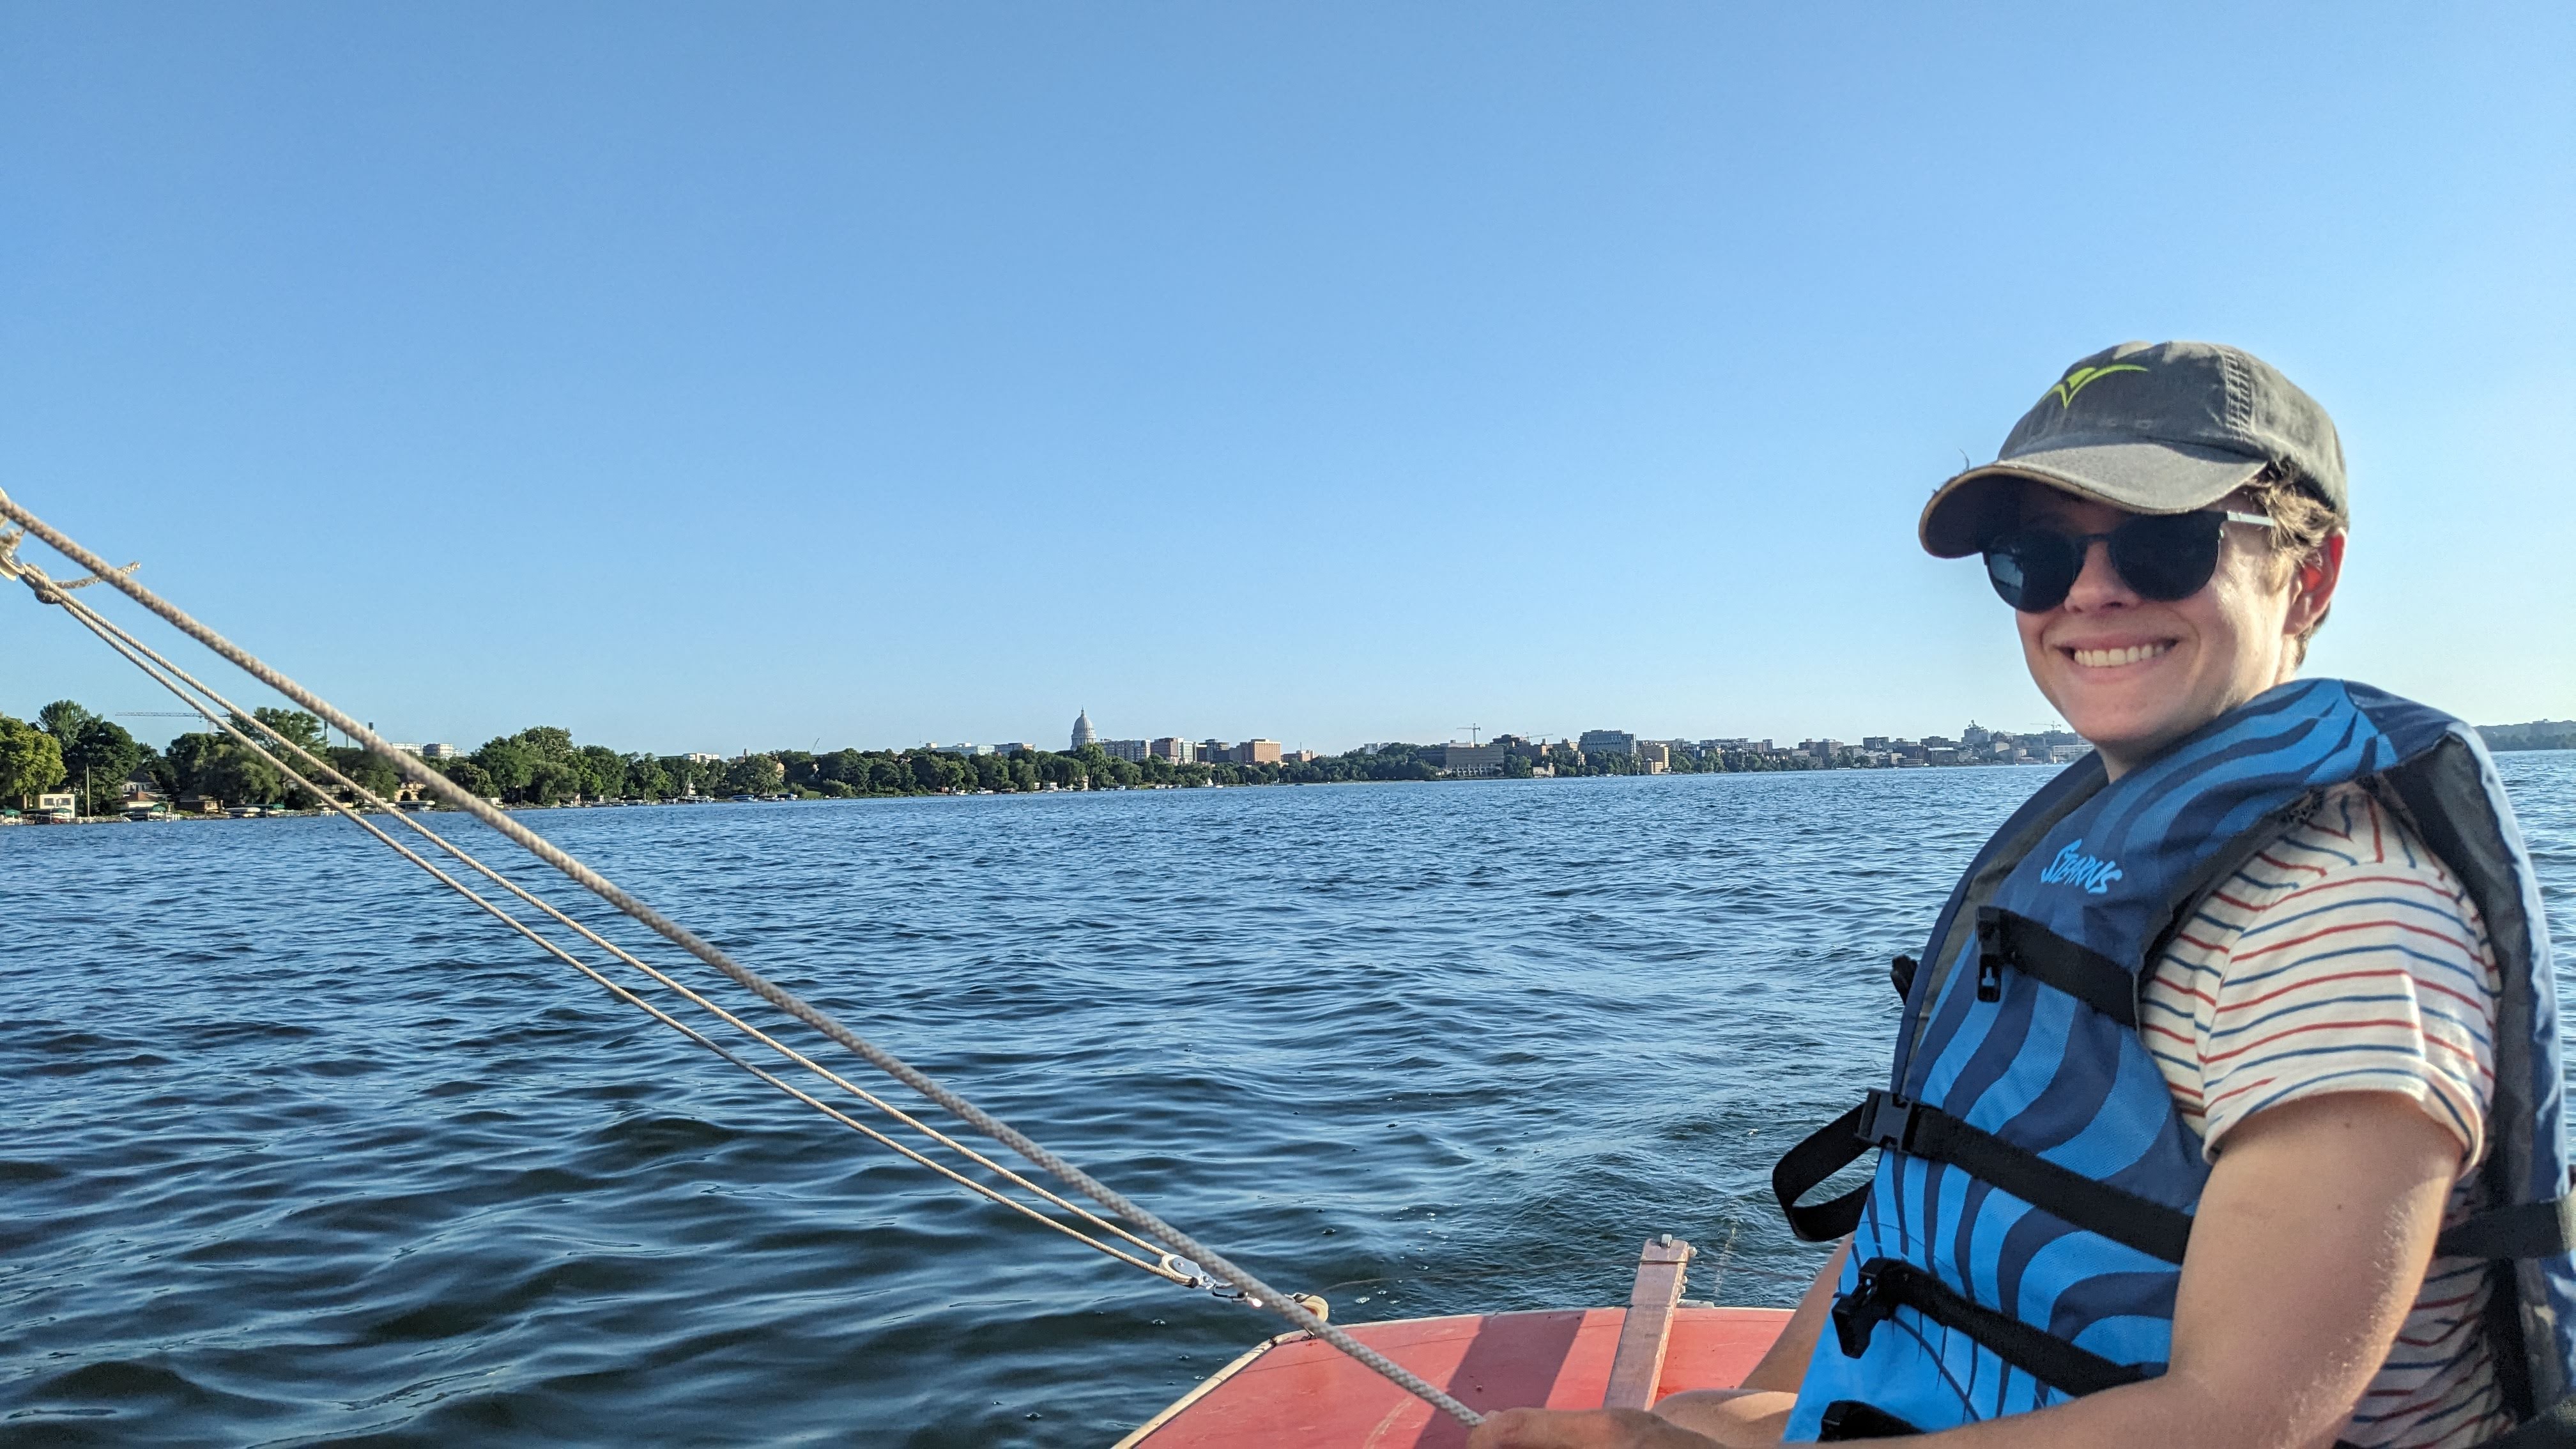 Claire sailing with the capitol in the background at the edge of a pretty blue lake